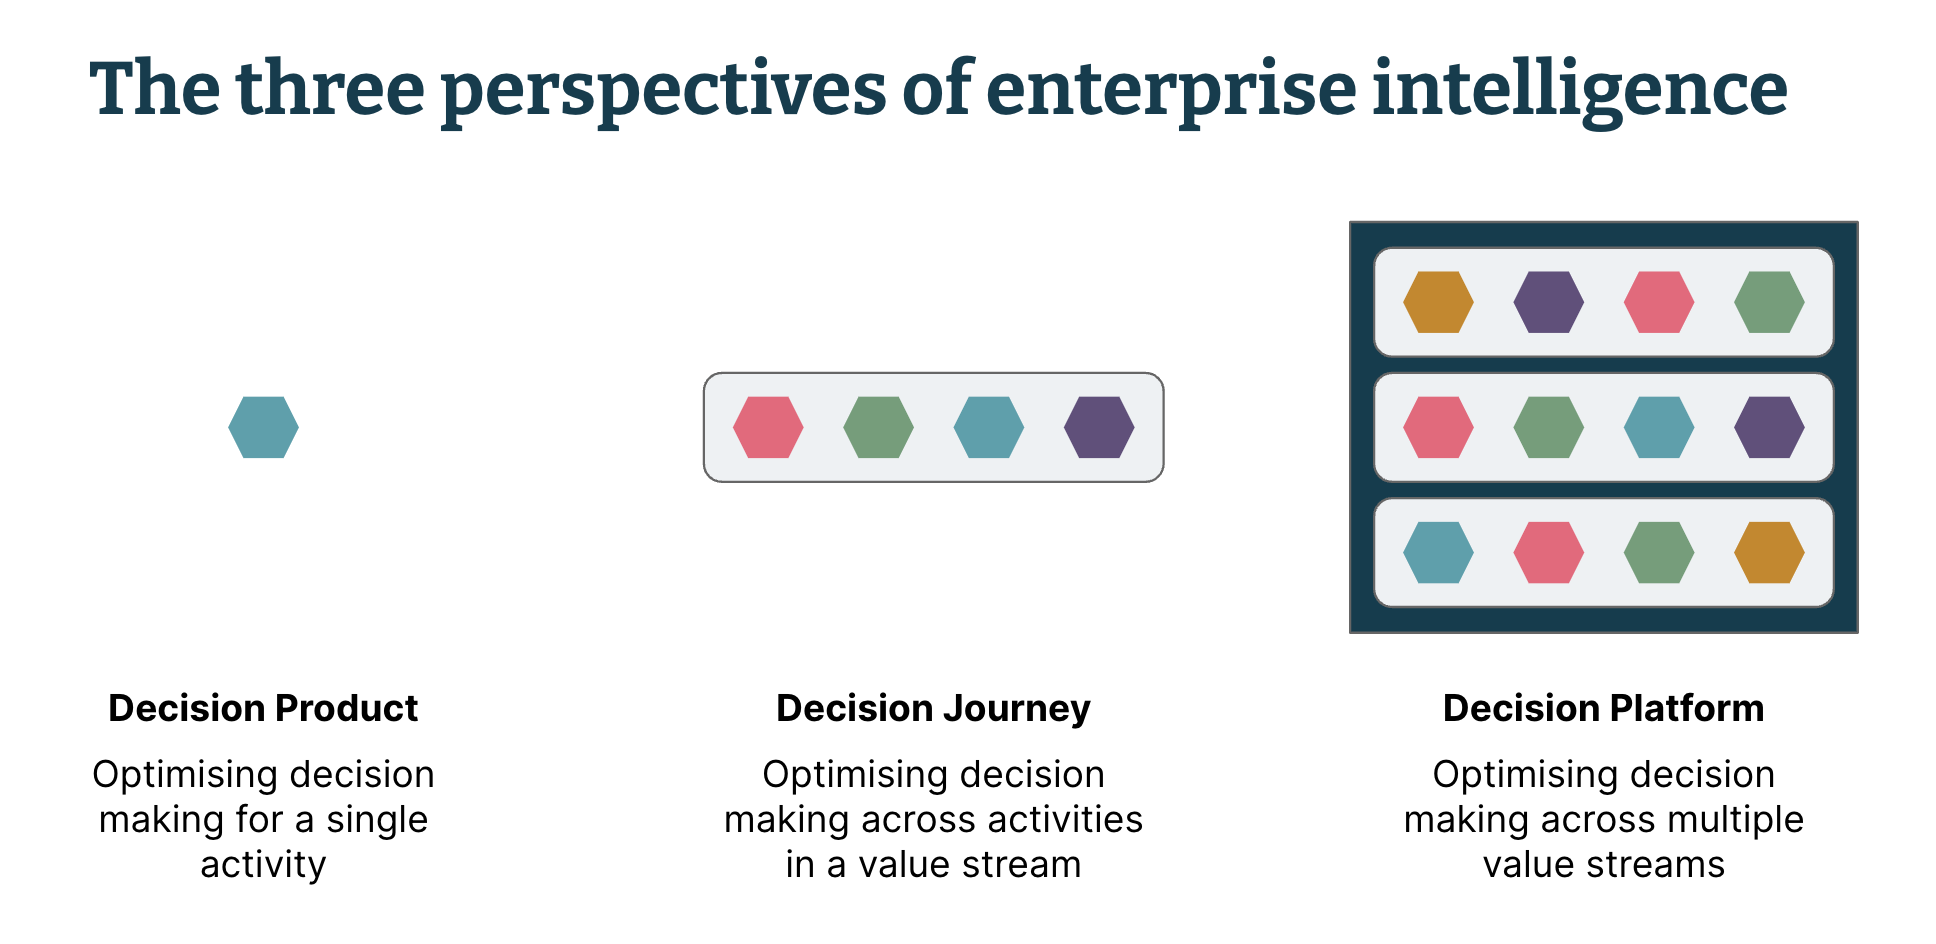 Diagram showing the three perspectives of applying enterprise intelligence and how the scope of decision interconnectedness grows as we move from decision product to decision platform. 